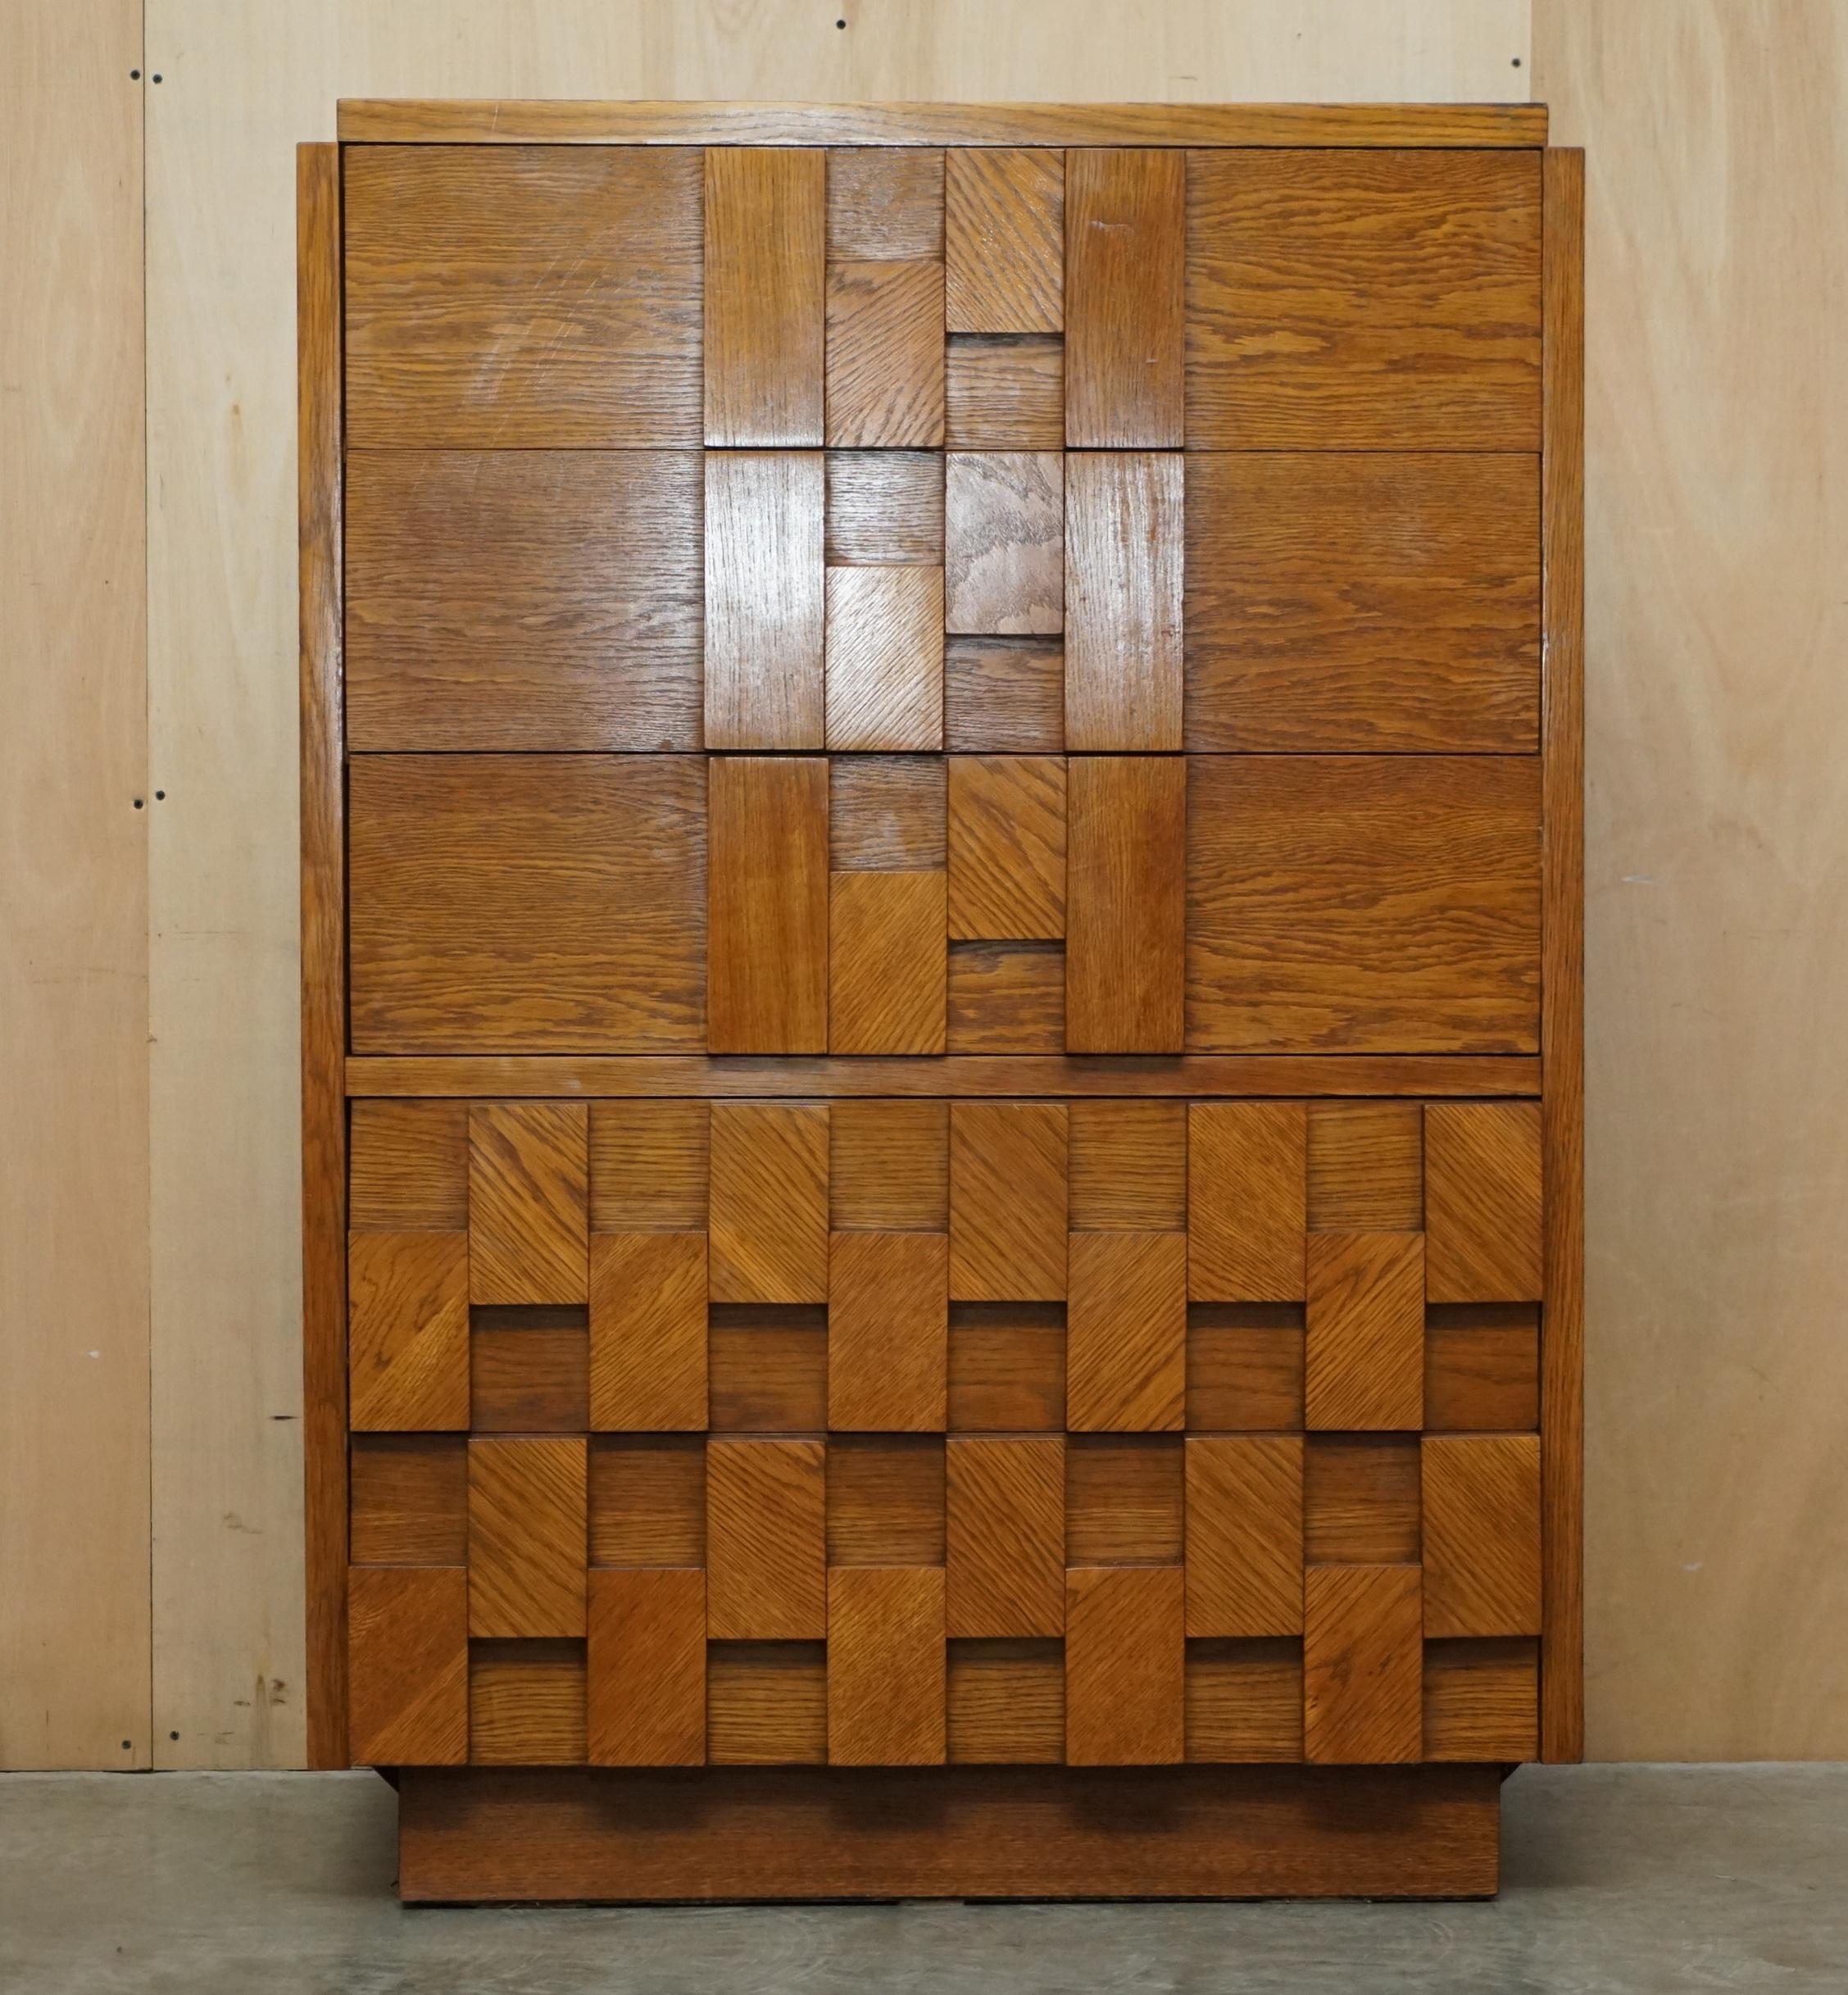 We are delighted to offer for sale this stunning original Paul Evans designed for Lane Furniture, Brutalist tallboy chest of drawers which is part of a suite.

Paul Evans was an American furniture designer and sculptor known for his unique tables